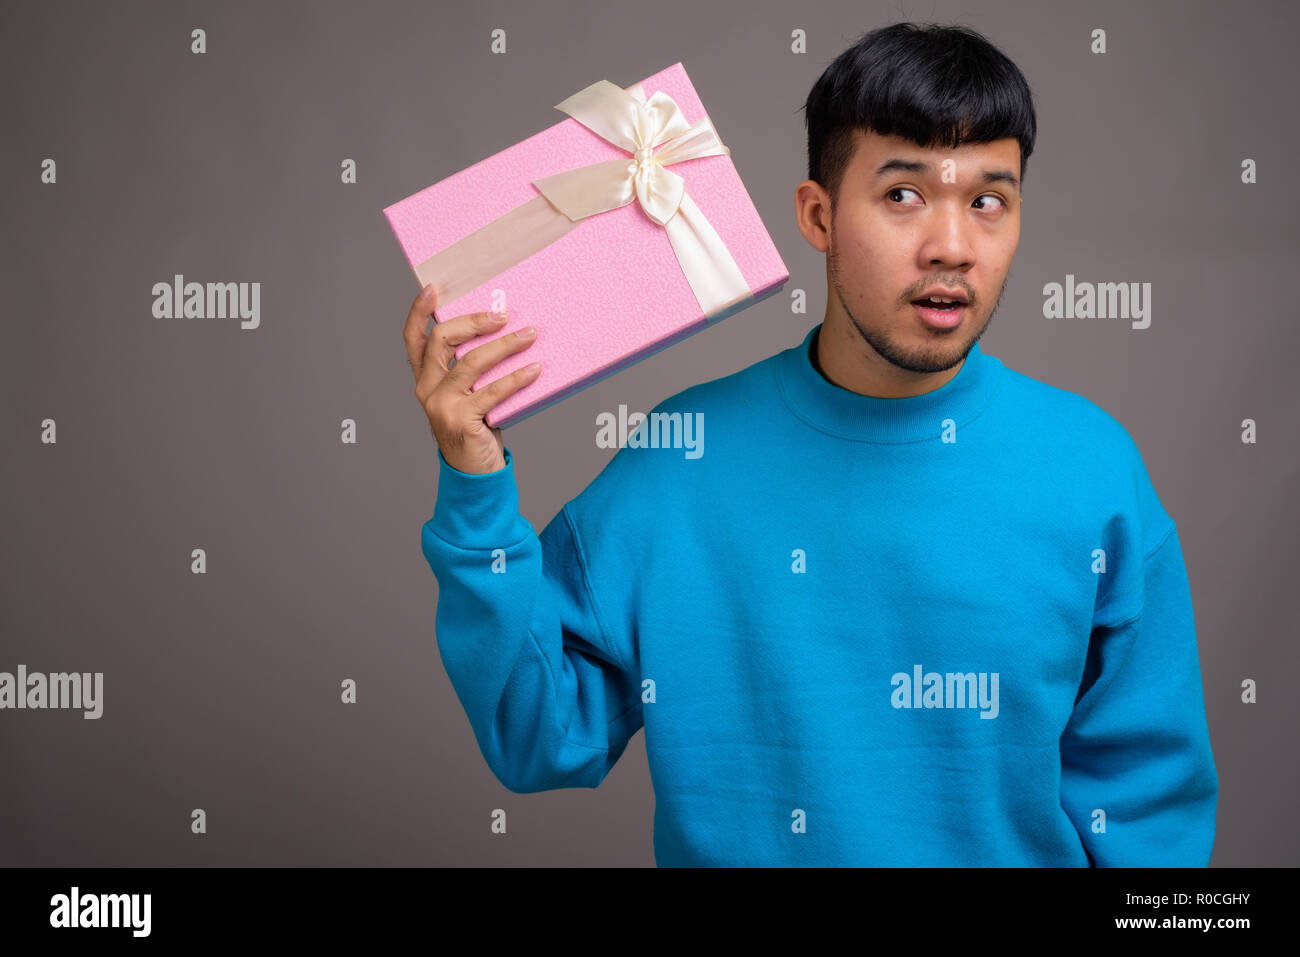 Portrait of young Asian man holding gift box Banque D'Images